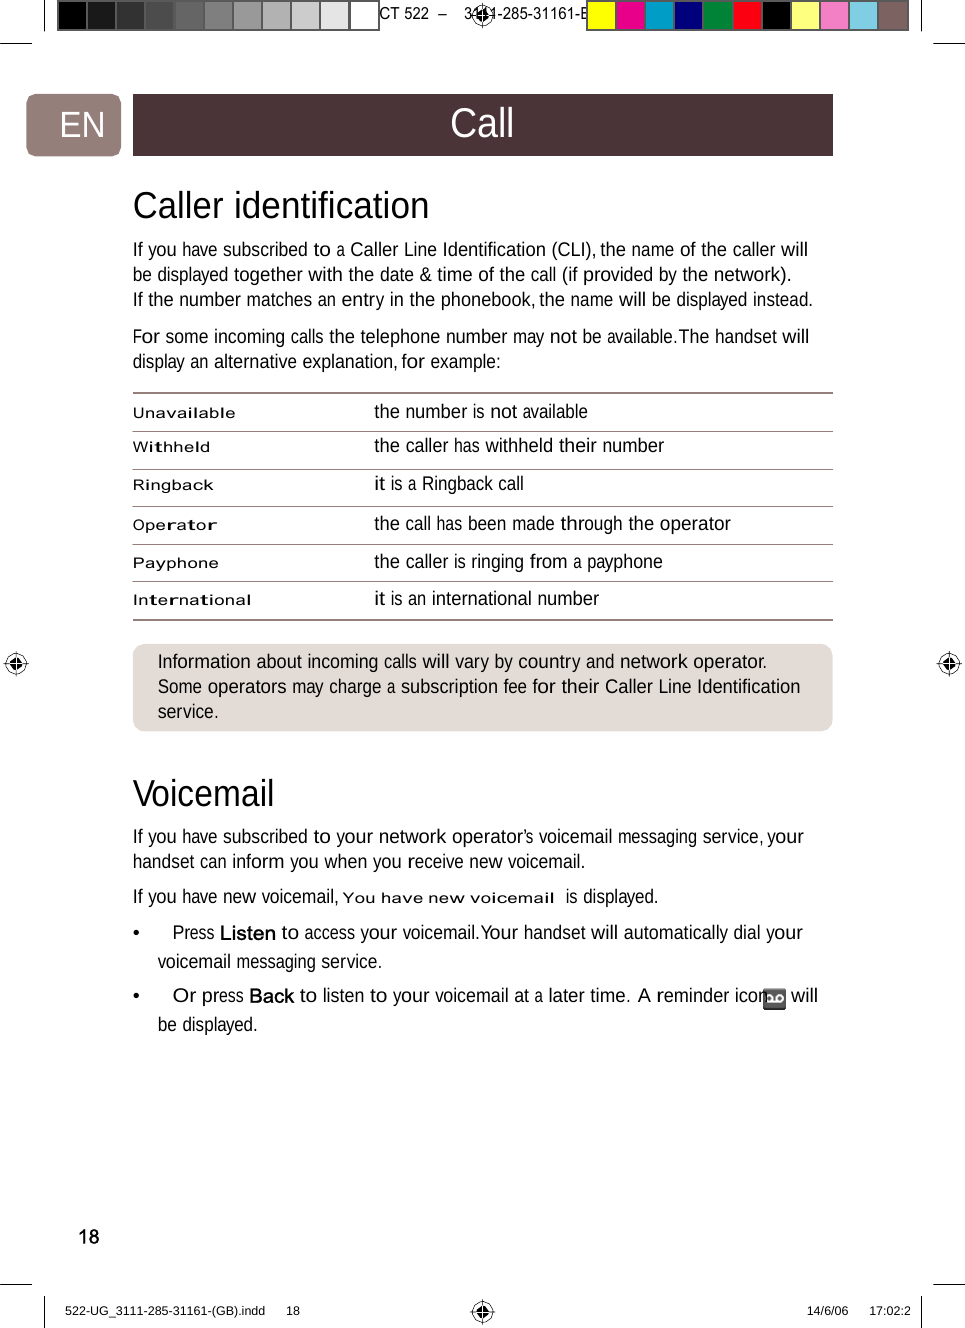 7471 – hilips DEB) –1 14.06.06CT522–3111-285-31161-EN CallCaller identiﬁcation If you have subscribed to a Caller Line Identiﬁcation (CLI), the name of the caller will be displayed together with the date &amp; time of the call (if provided by the network). If the number matches an entry in the phonebook, the name will be displayed instead.  For some incoming calls the telephone number may not be available.The handset will display an alternative explanation, forexample:Unavailable thenumberisnotavailable Withheld the caller has withheld their number  Ringback it is a Ringback call Operator the call has been made through the operator Payphone the caller is ringing from a payphone International it is an international number Information about incomingcallswillvarybycountryandnetworkoperator. Some operators may charge a subscription fee for their Caller Line Identiﬁcation service. Voicemail  If you have subscribed to your network operator’s voicemail messaging service, your handset can inform you when you receive new voicemail. If you have new voicemail, You have new voicemail  is displayed. •   Press Listen to access your voicemail.Your handset will automatically dial your voicemail messaging service. •   Or press Back to listen to your voicemail at a later time. A reminder icon will be displayed. 18522-UG_3111-285-31161-(GB).indd    18 14/6/06   17:02:2 